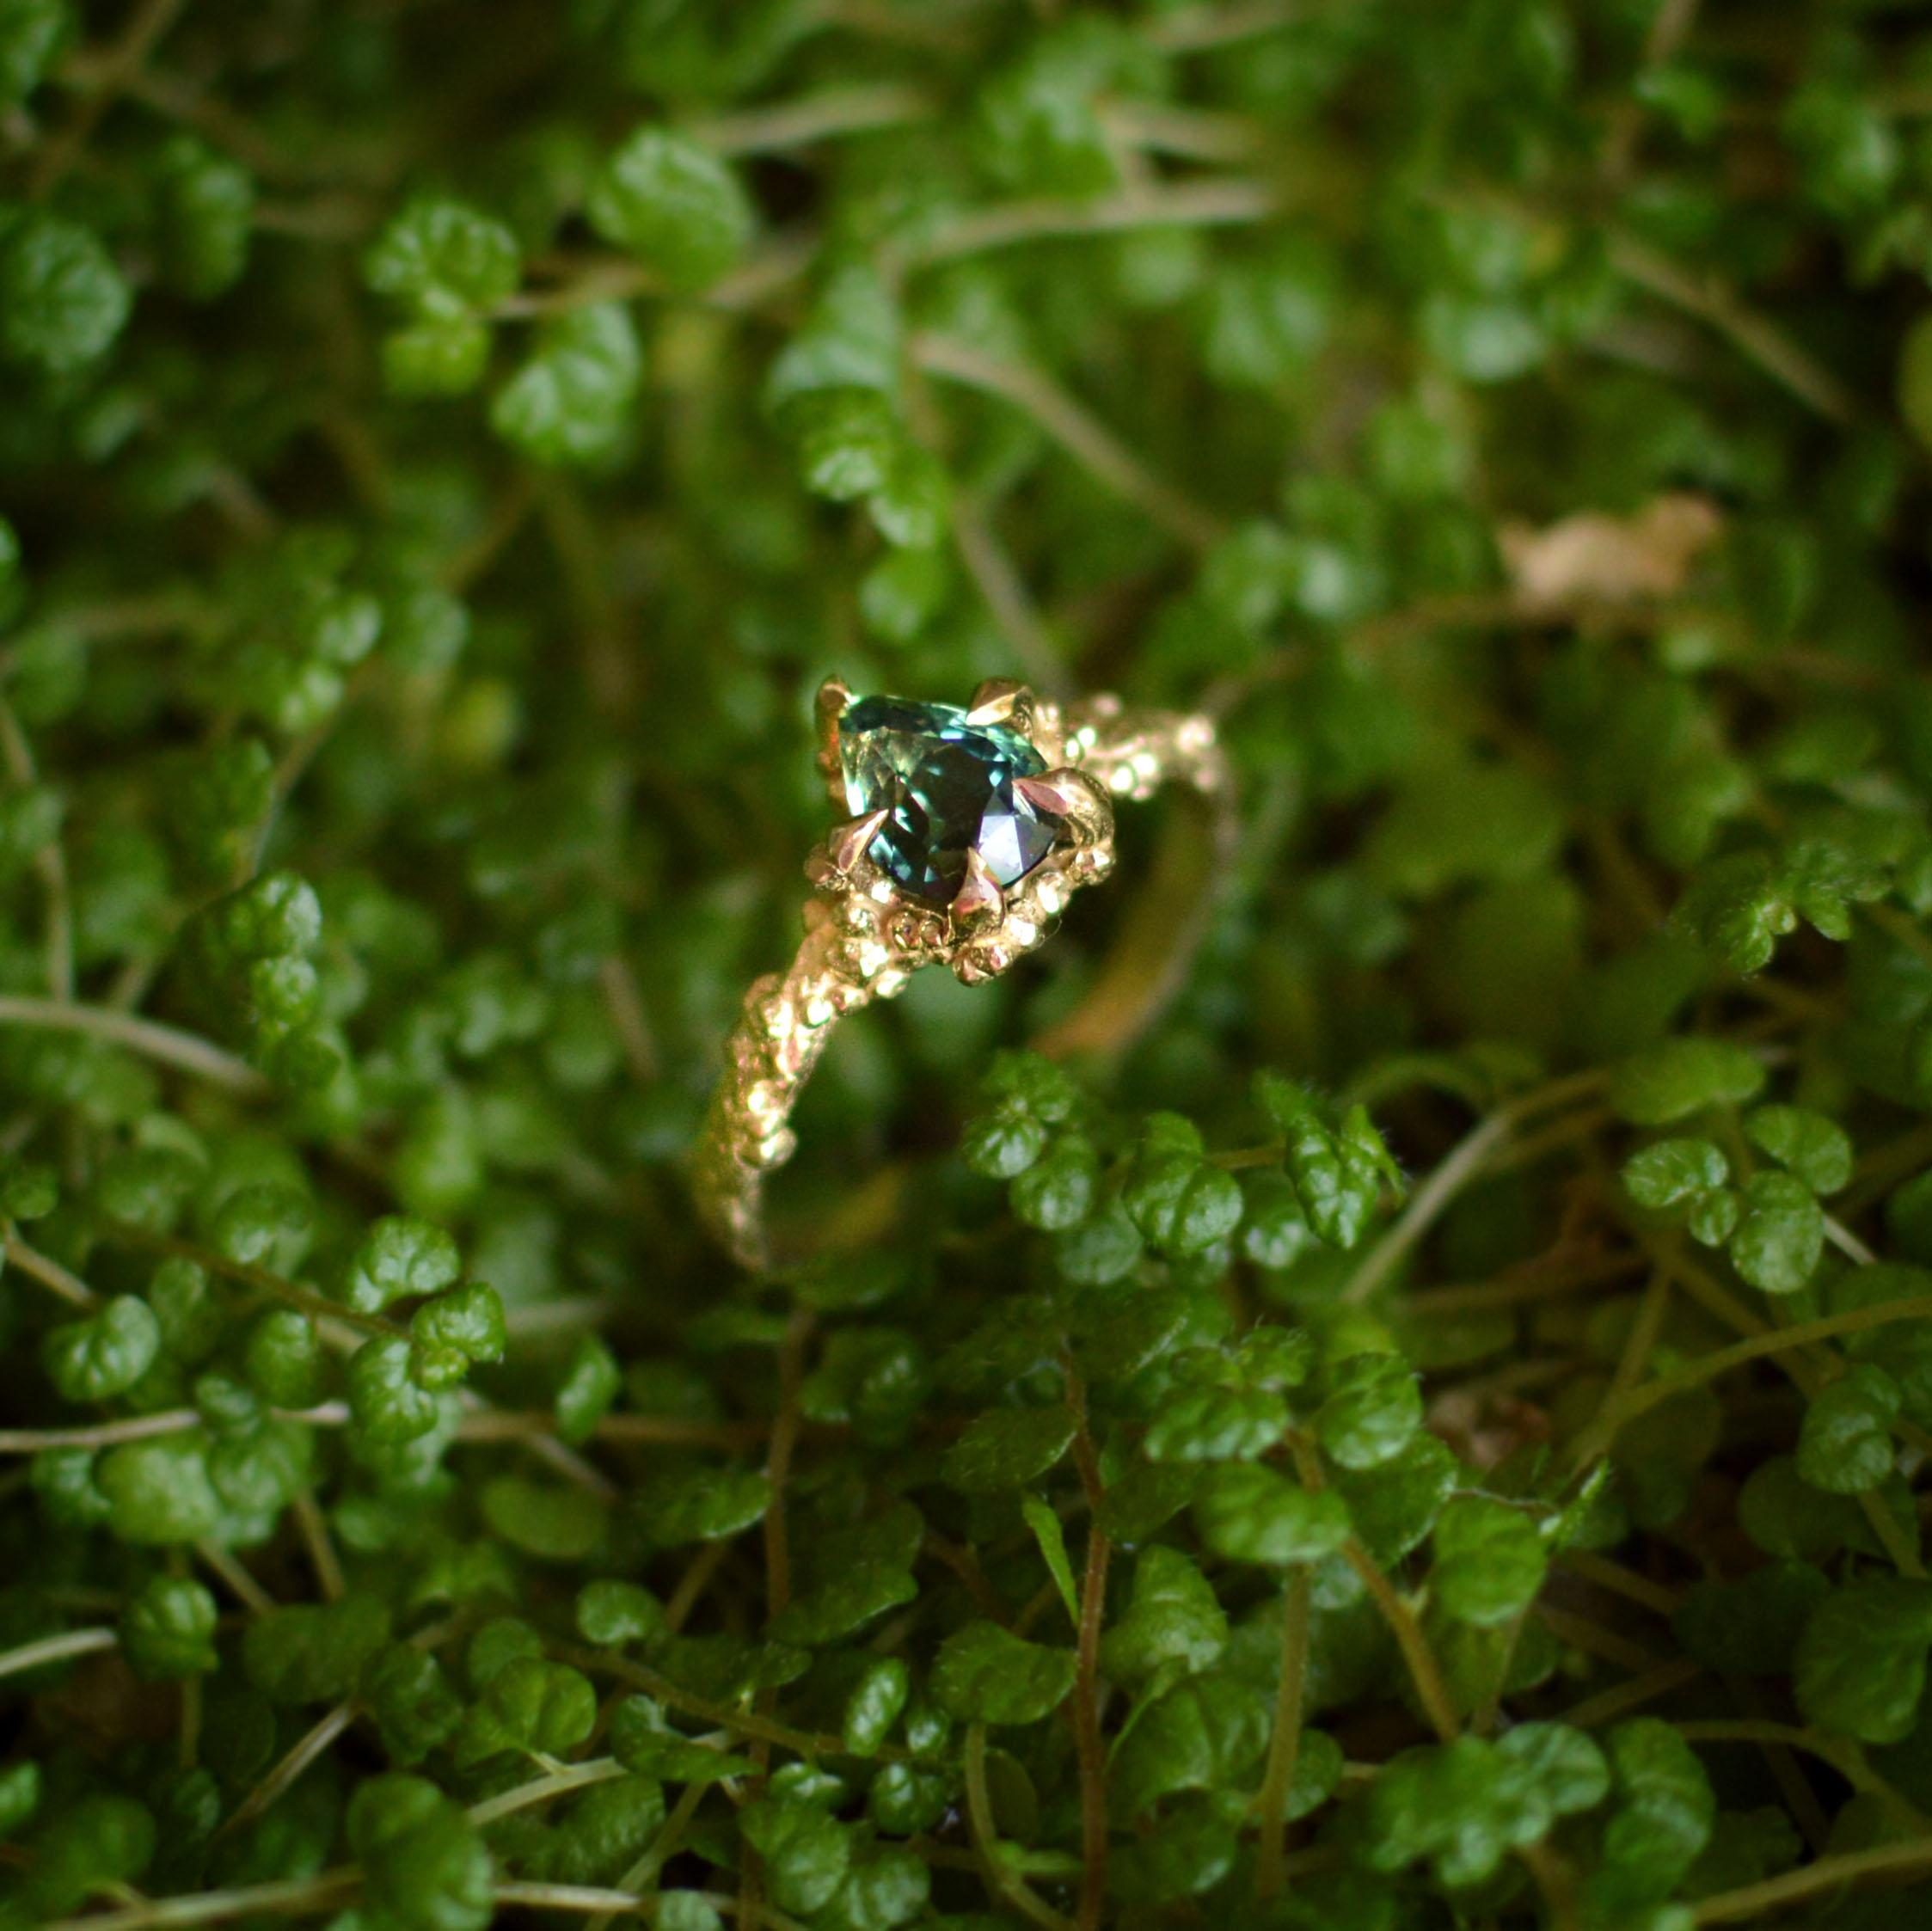 This magical ocean inspired ring is set with a 1.1ct natural teal green Montana sapphire in a beautiful champagne yellow 9 carat gold band.  This piece was created from Lucy's original hand-sculpted design.

Every sapphire is unique so the precise